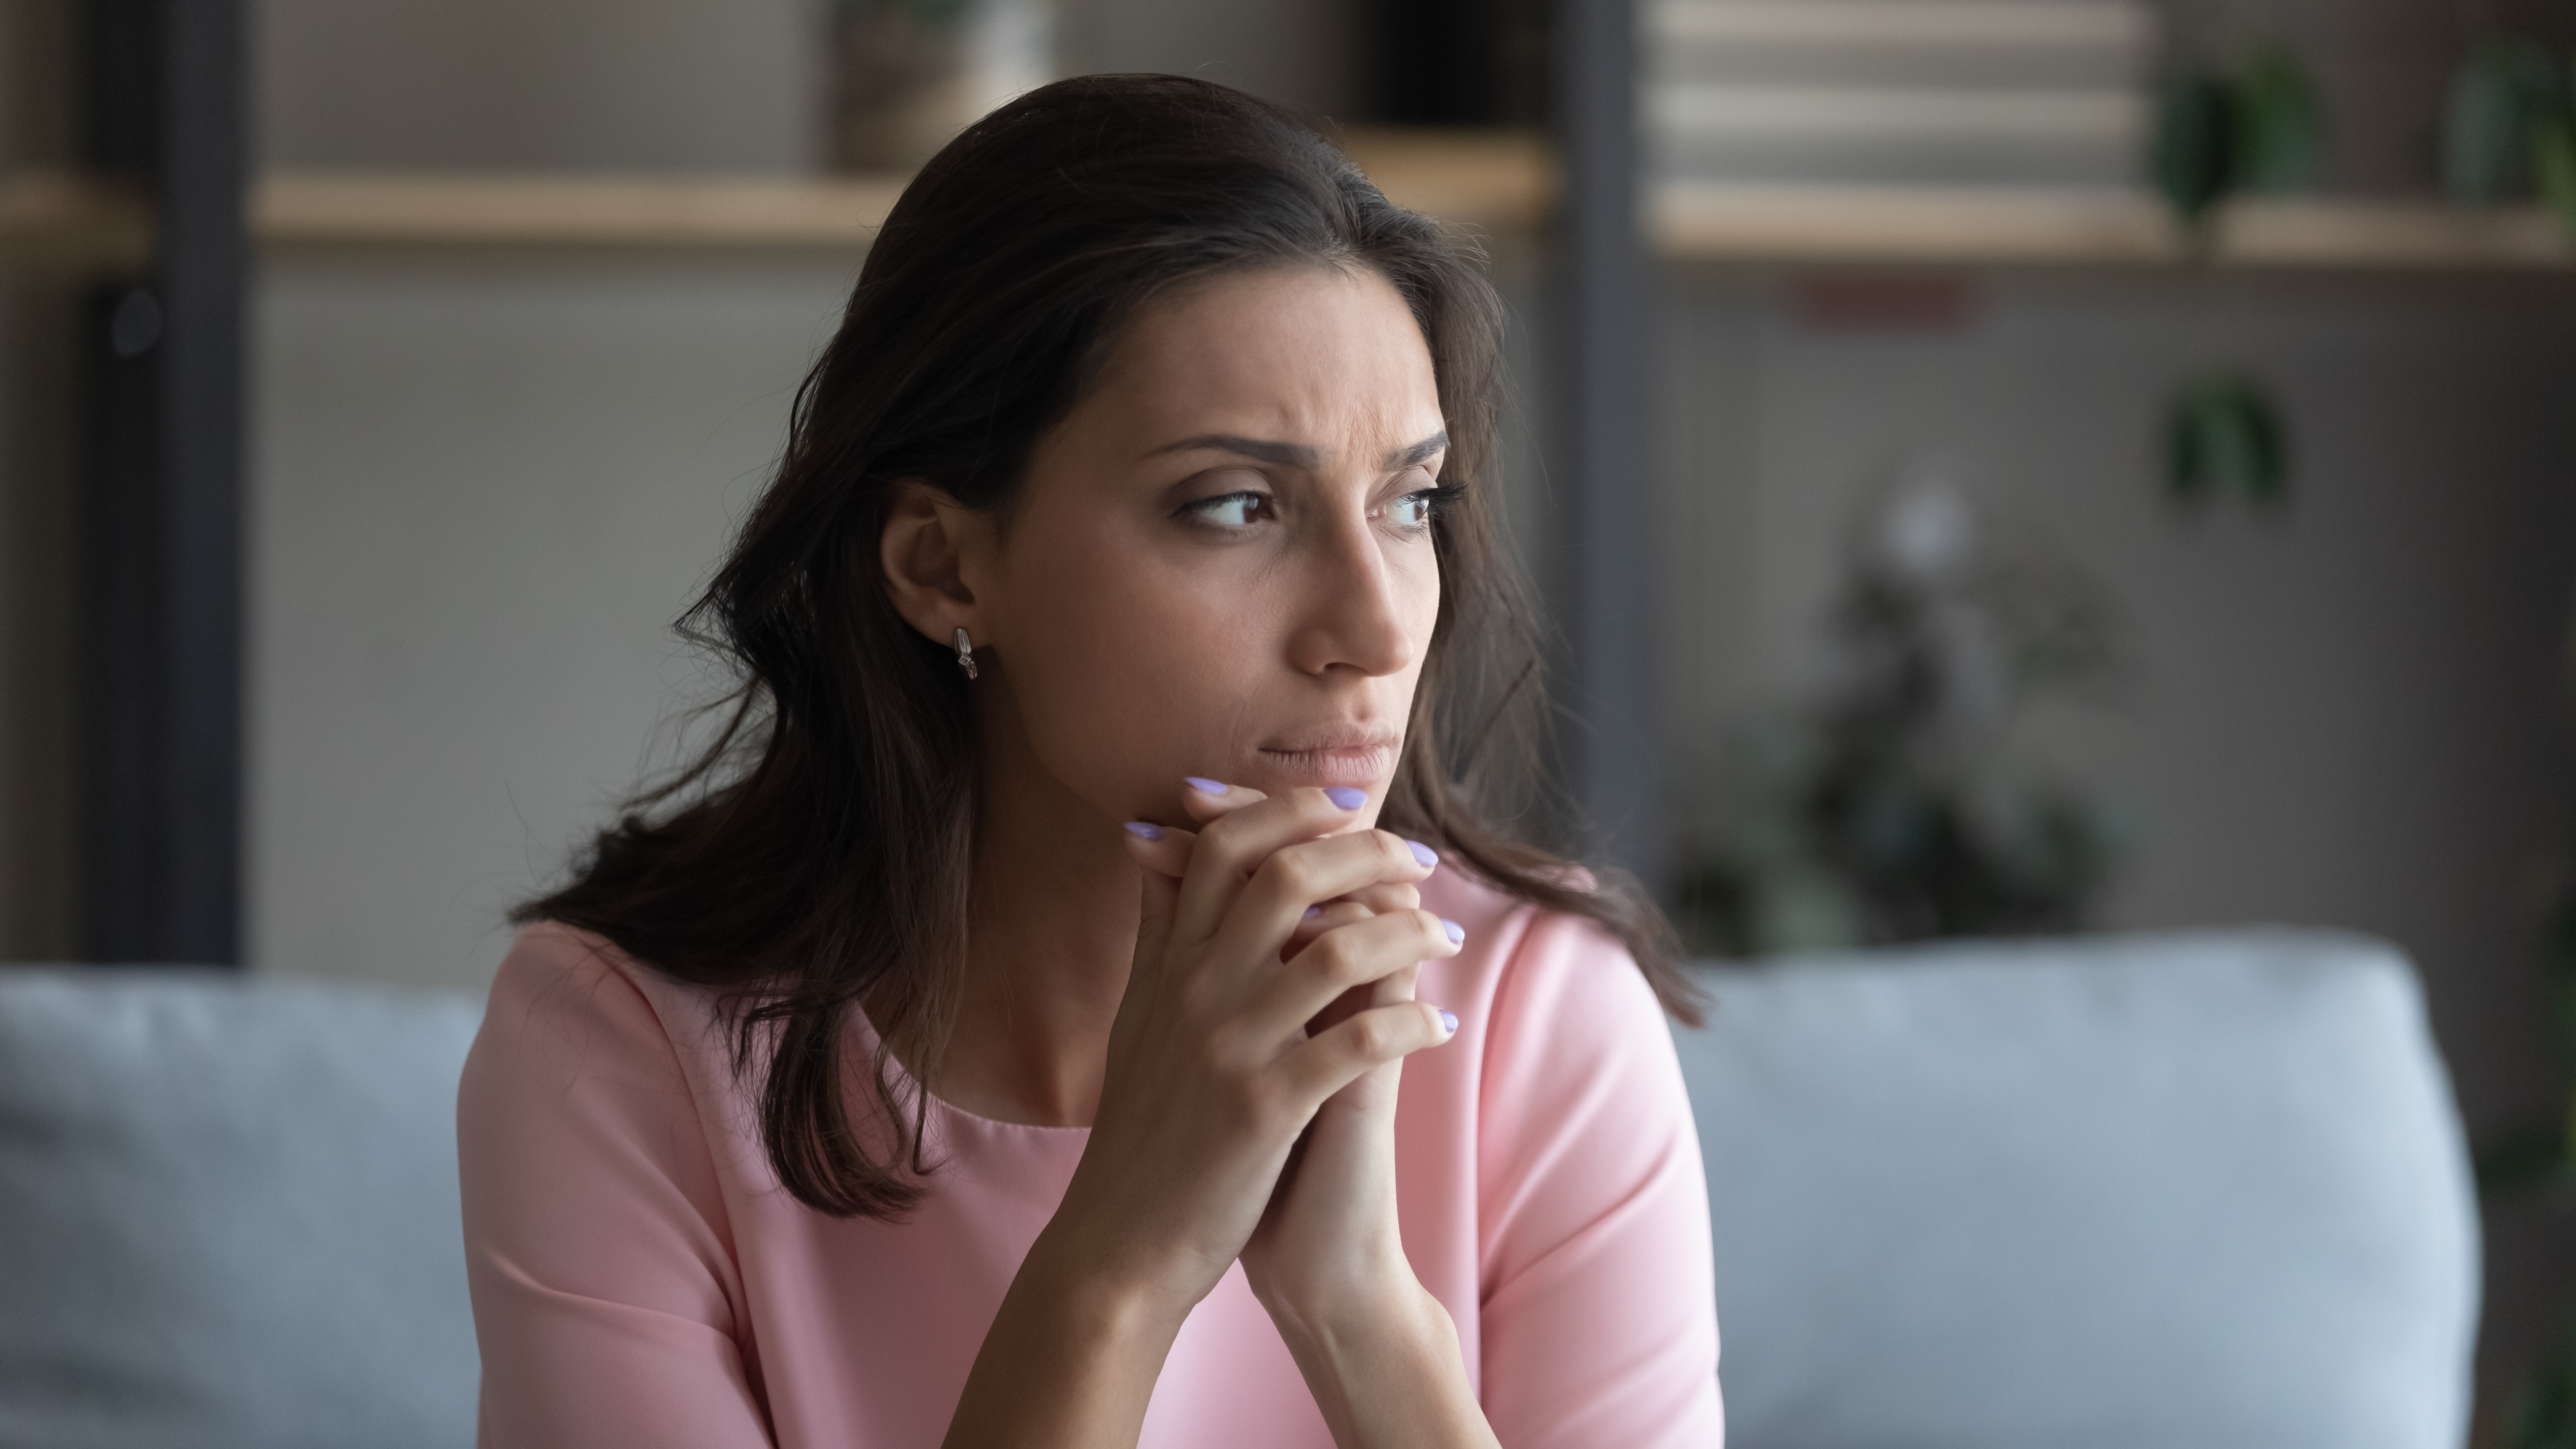 Pensive woman looking out the window while sitting on the sofa | Source: Shutterstock